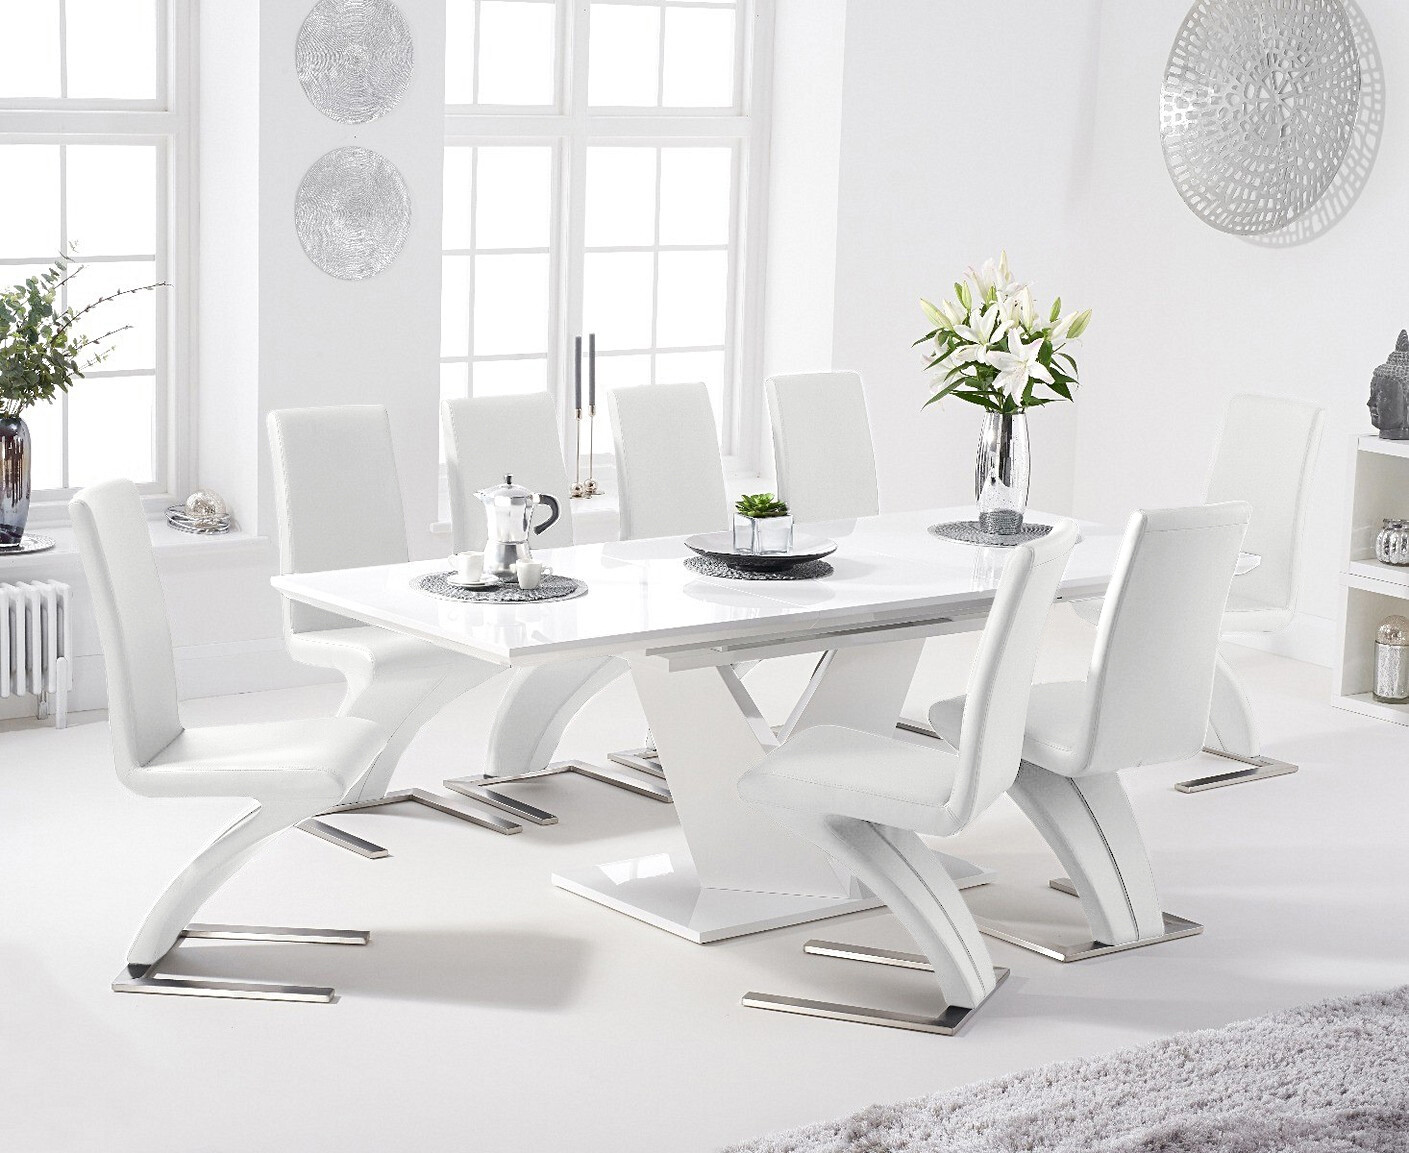 Extending Vittorio 160cm White High Gloss Dining Table With 4 White Aldo Faux Leather Chairs